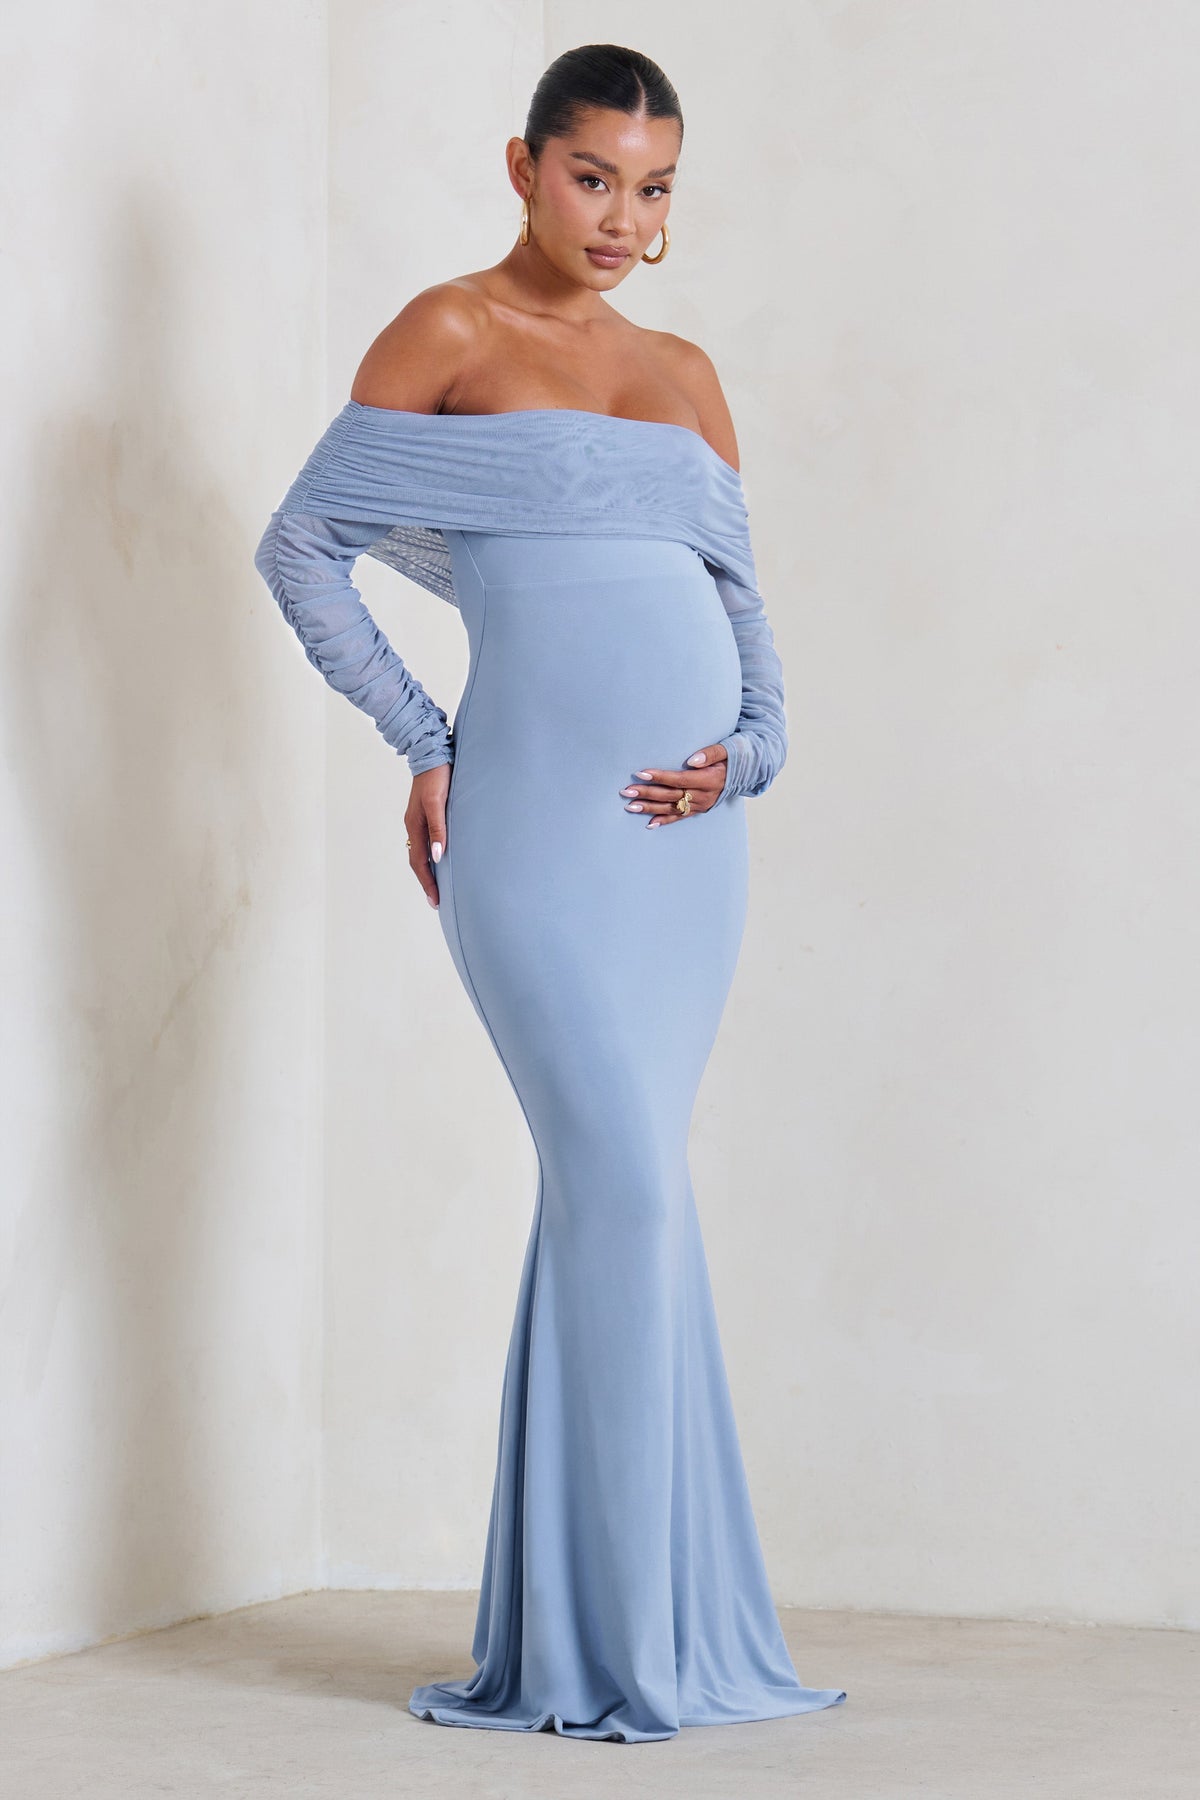 New* Blue PinkBlush Maternity Ruched Special Occasion Maternity